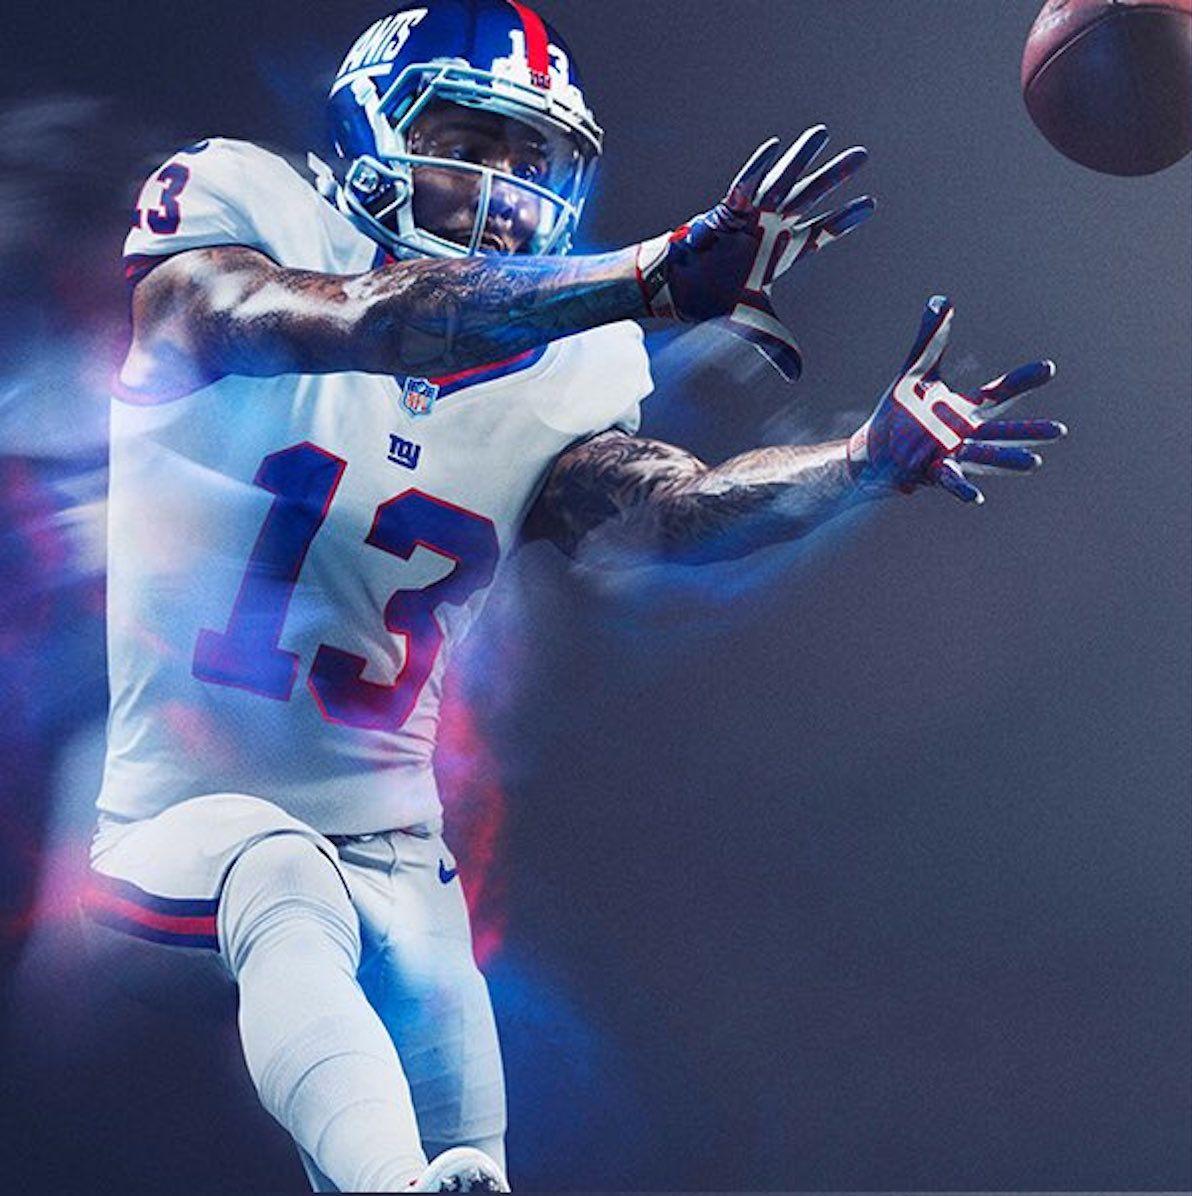 Power Ranking all 32 NFL Color Rush Uniforms. New York Giants. Nfl color rush uniforms, Nfl football art, New york giants